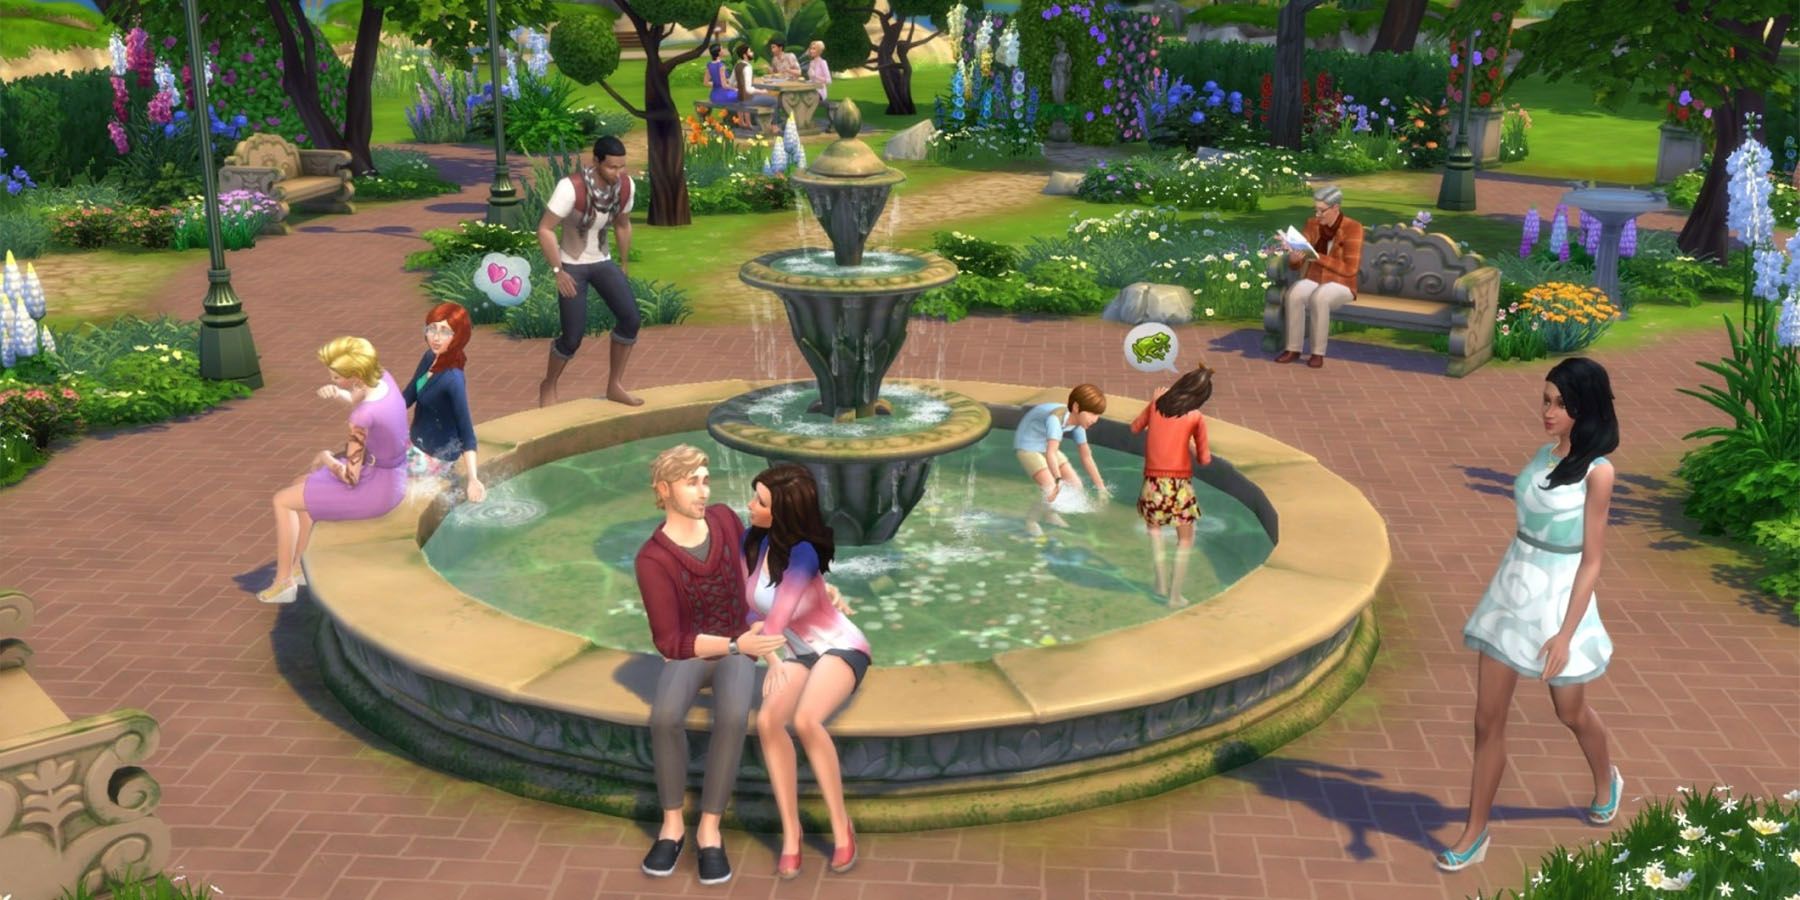 The Sims 4 Relationship Cheats: Max Friendship and Romance Levels